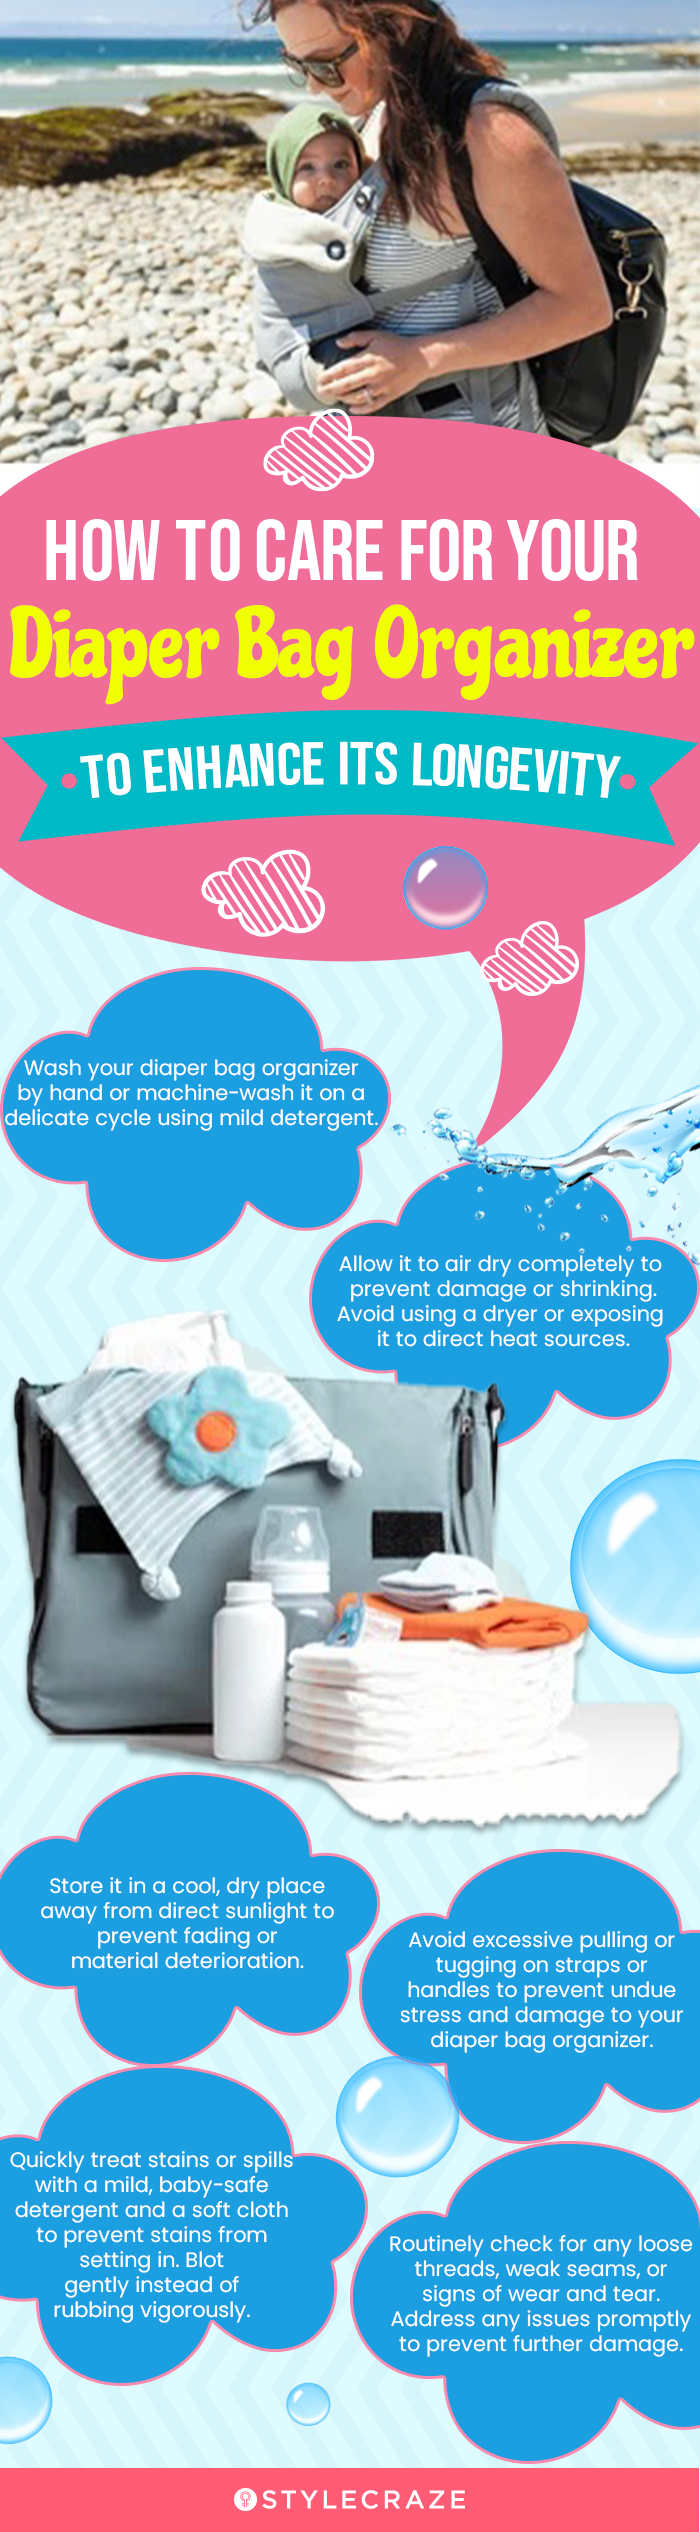 How To Care For Your Diaper Bag Organizer (infographic)